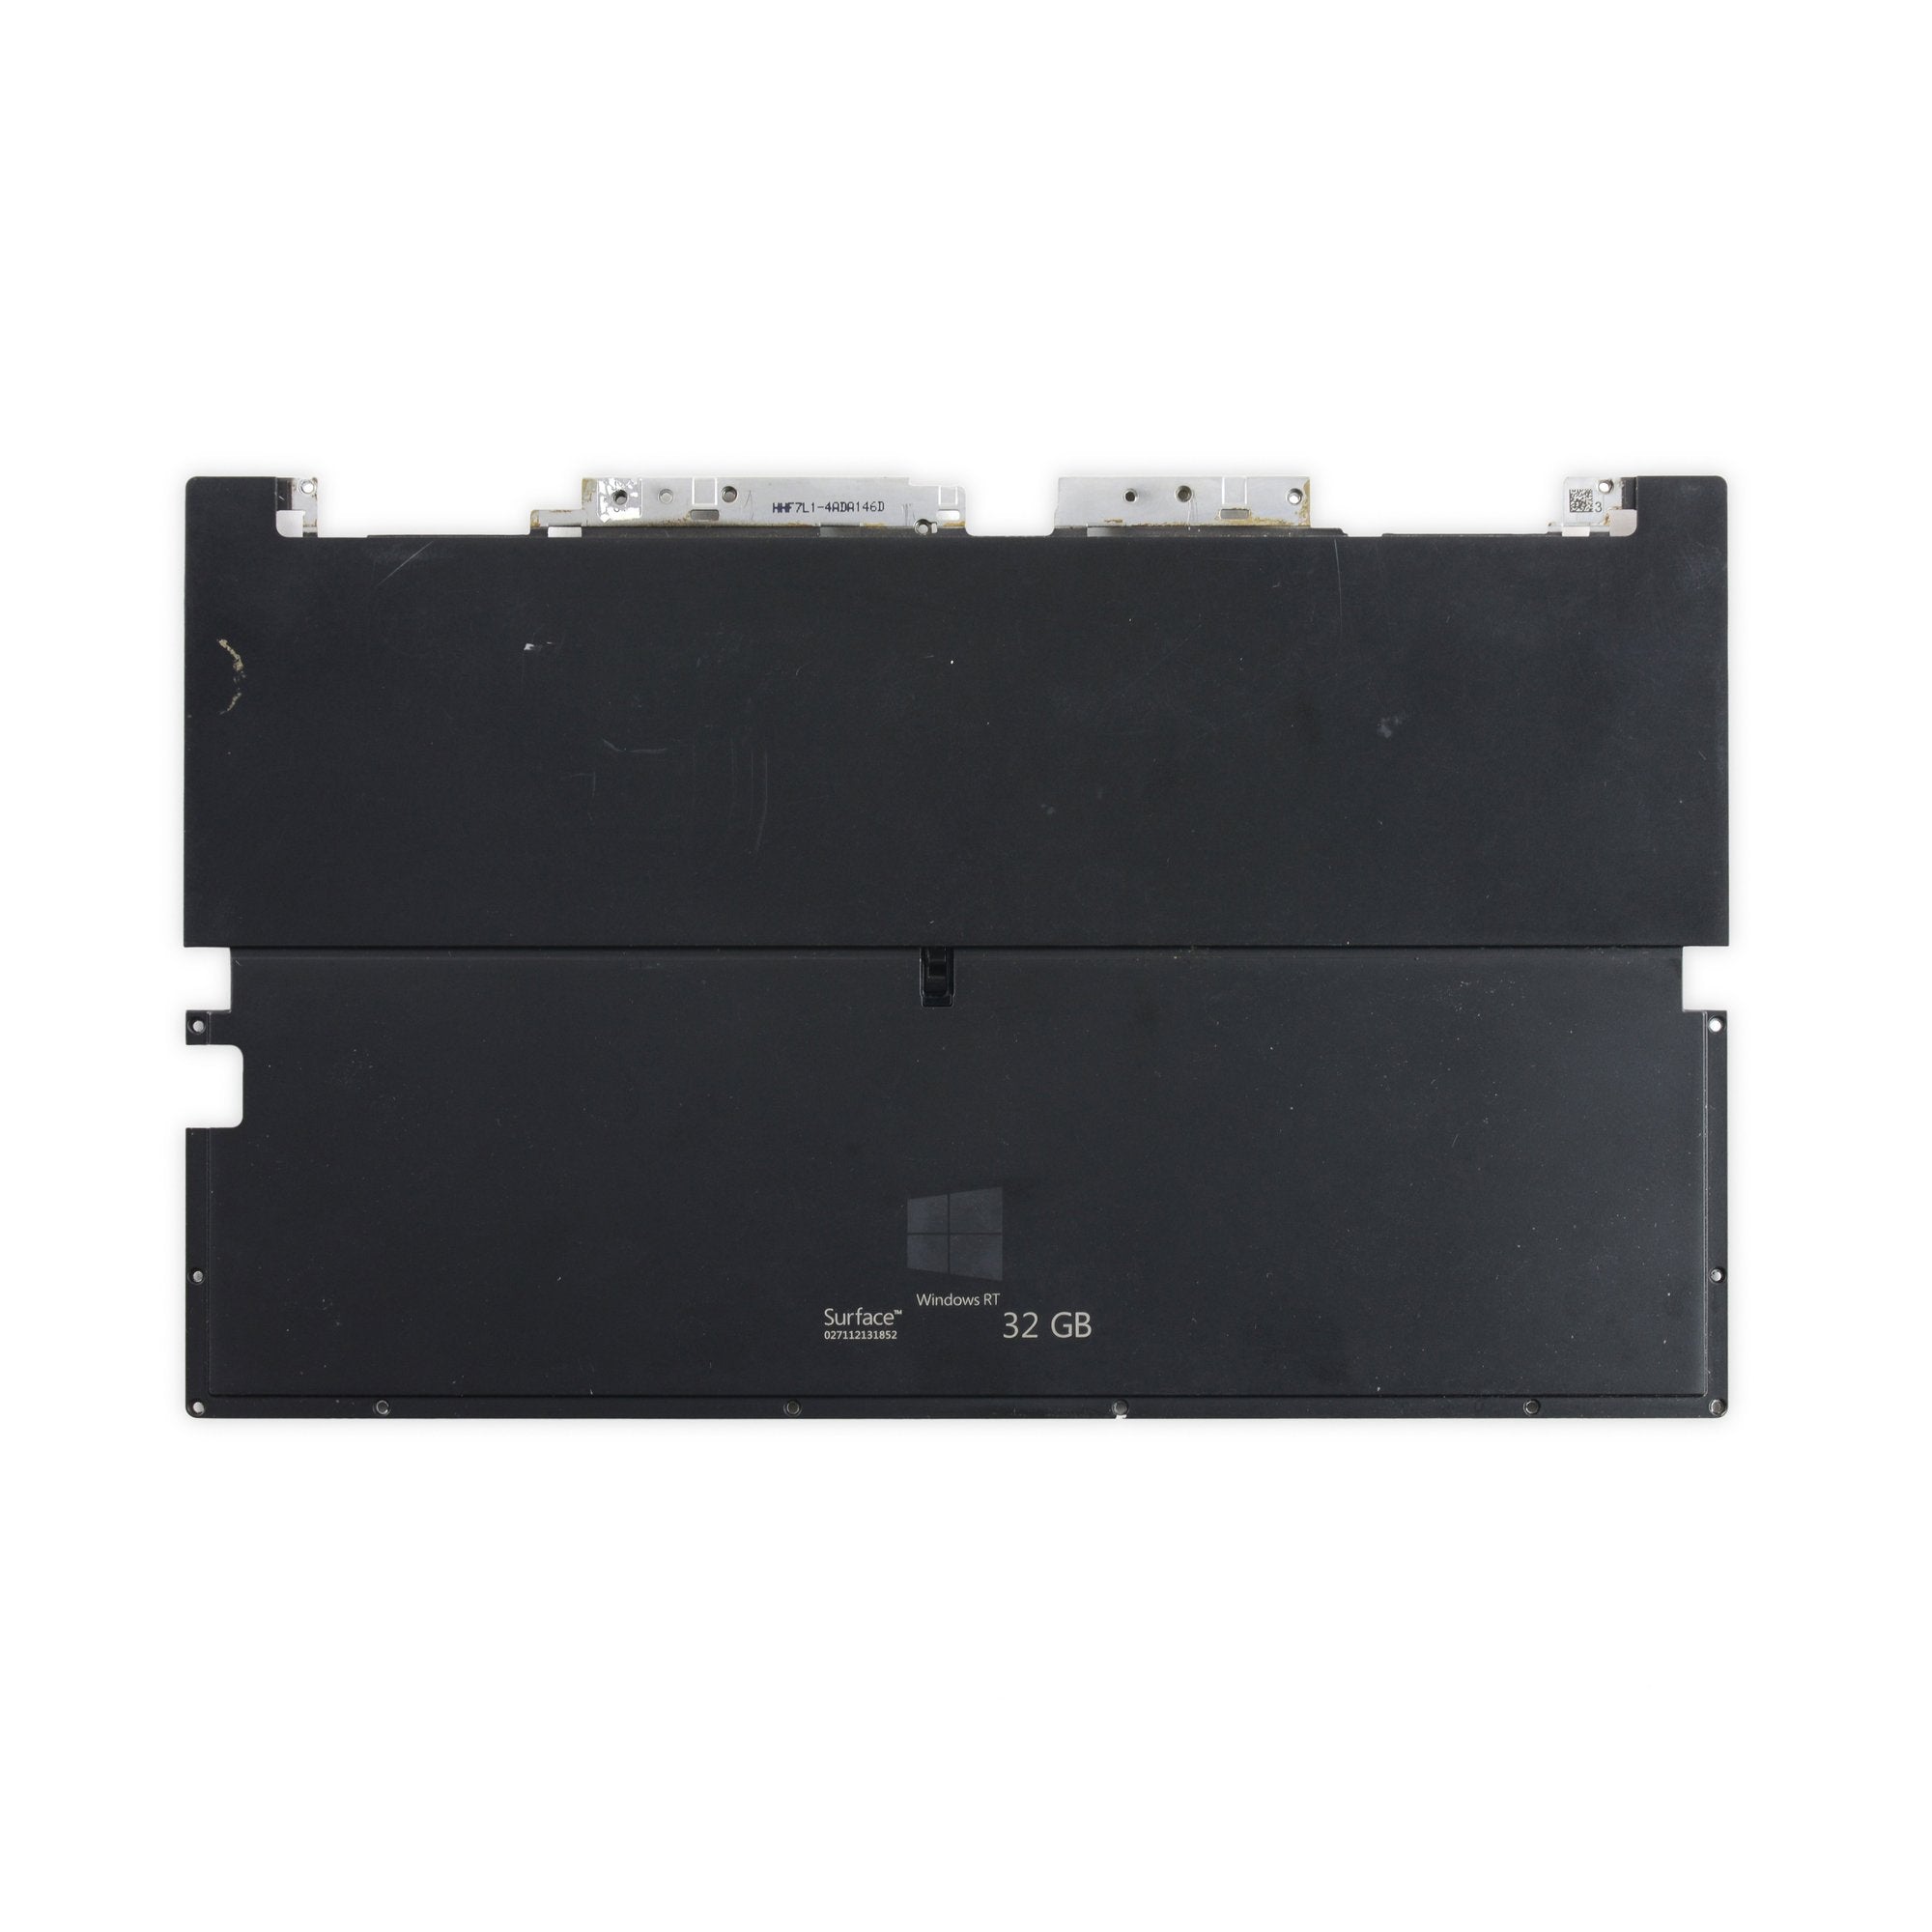 Surface RT (1st Gen) Rear Panel Used